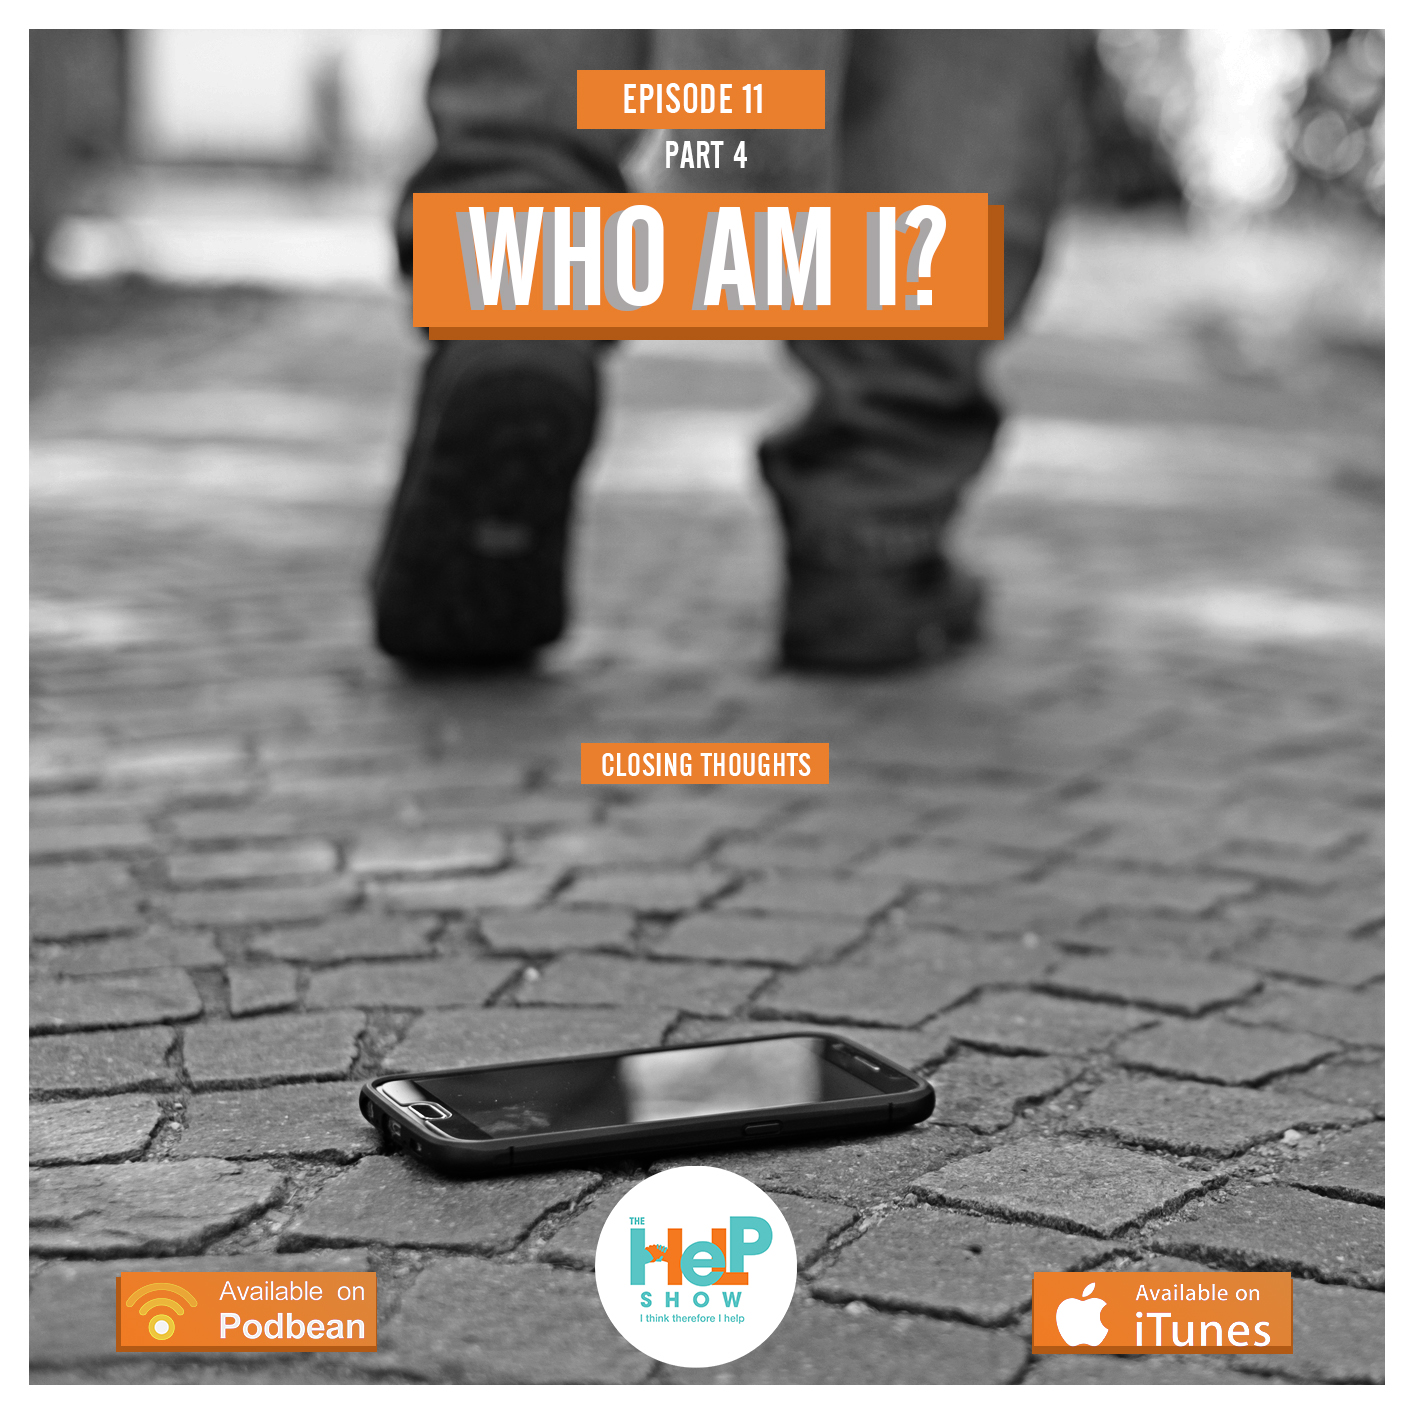 Who Am I? (Episode 11: Part 4) Closing Thoughts